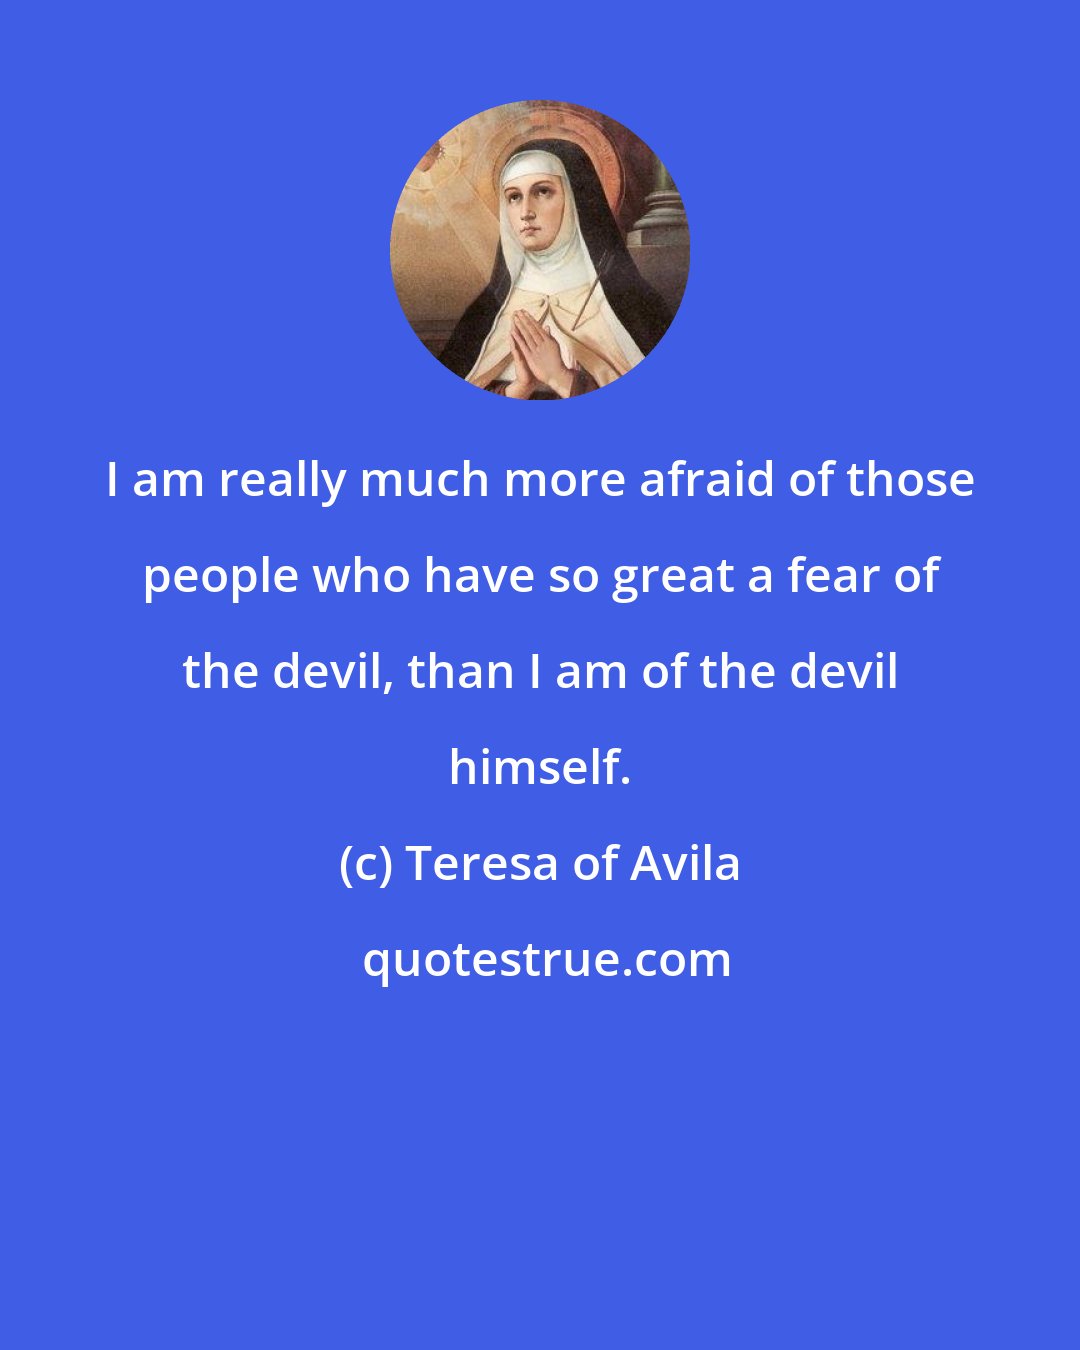 Teresa of Avila: I am really much more afraid of those people who have so great a fear of the devil, than I am of the devil himself.